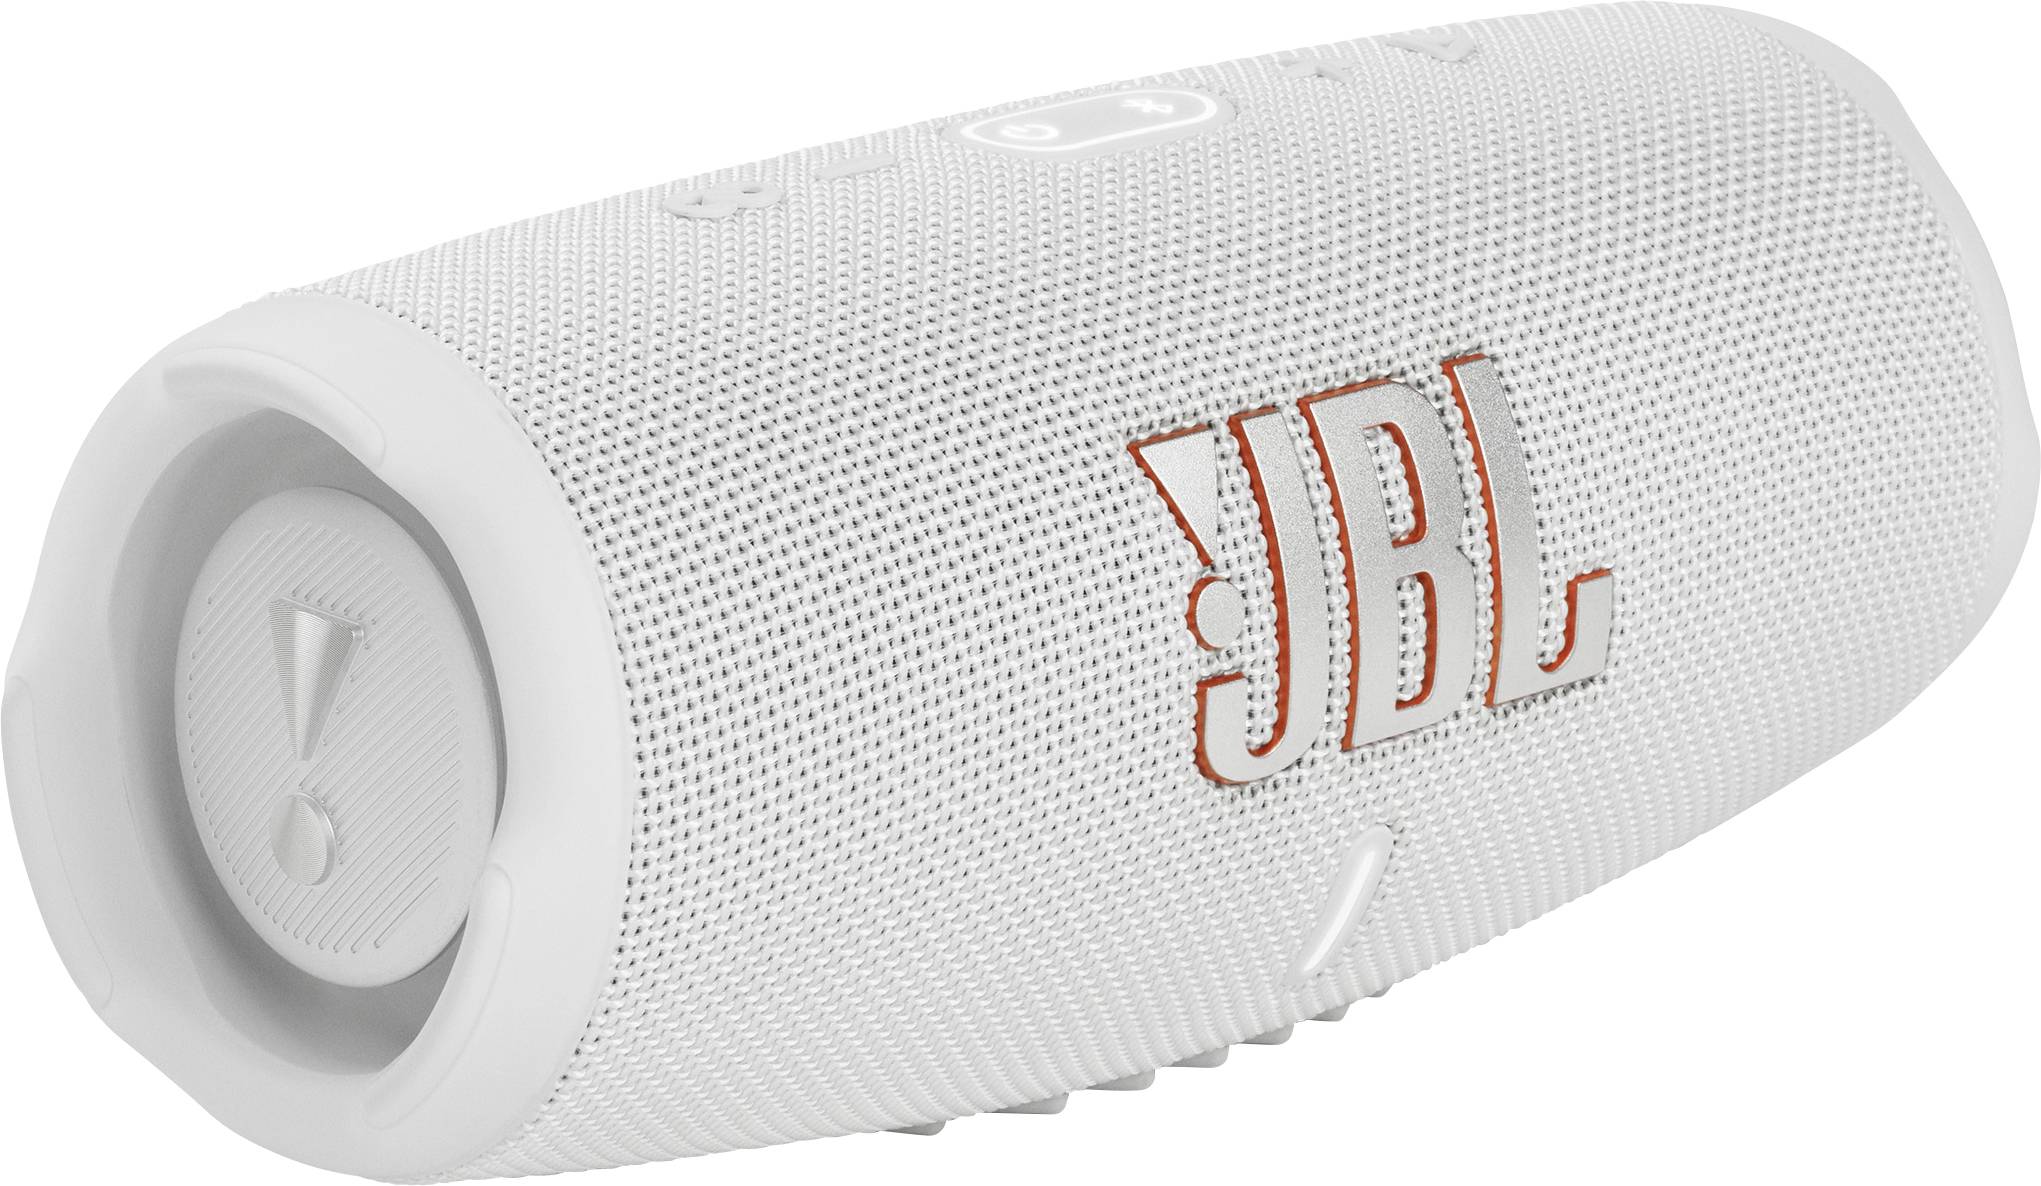 JBL CHARGE Bluetooth speaker Outdoor, Water-proof, Conrad.com